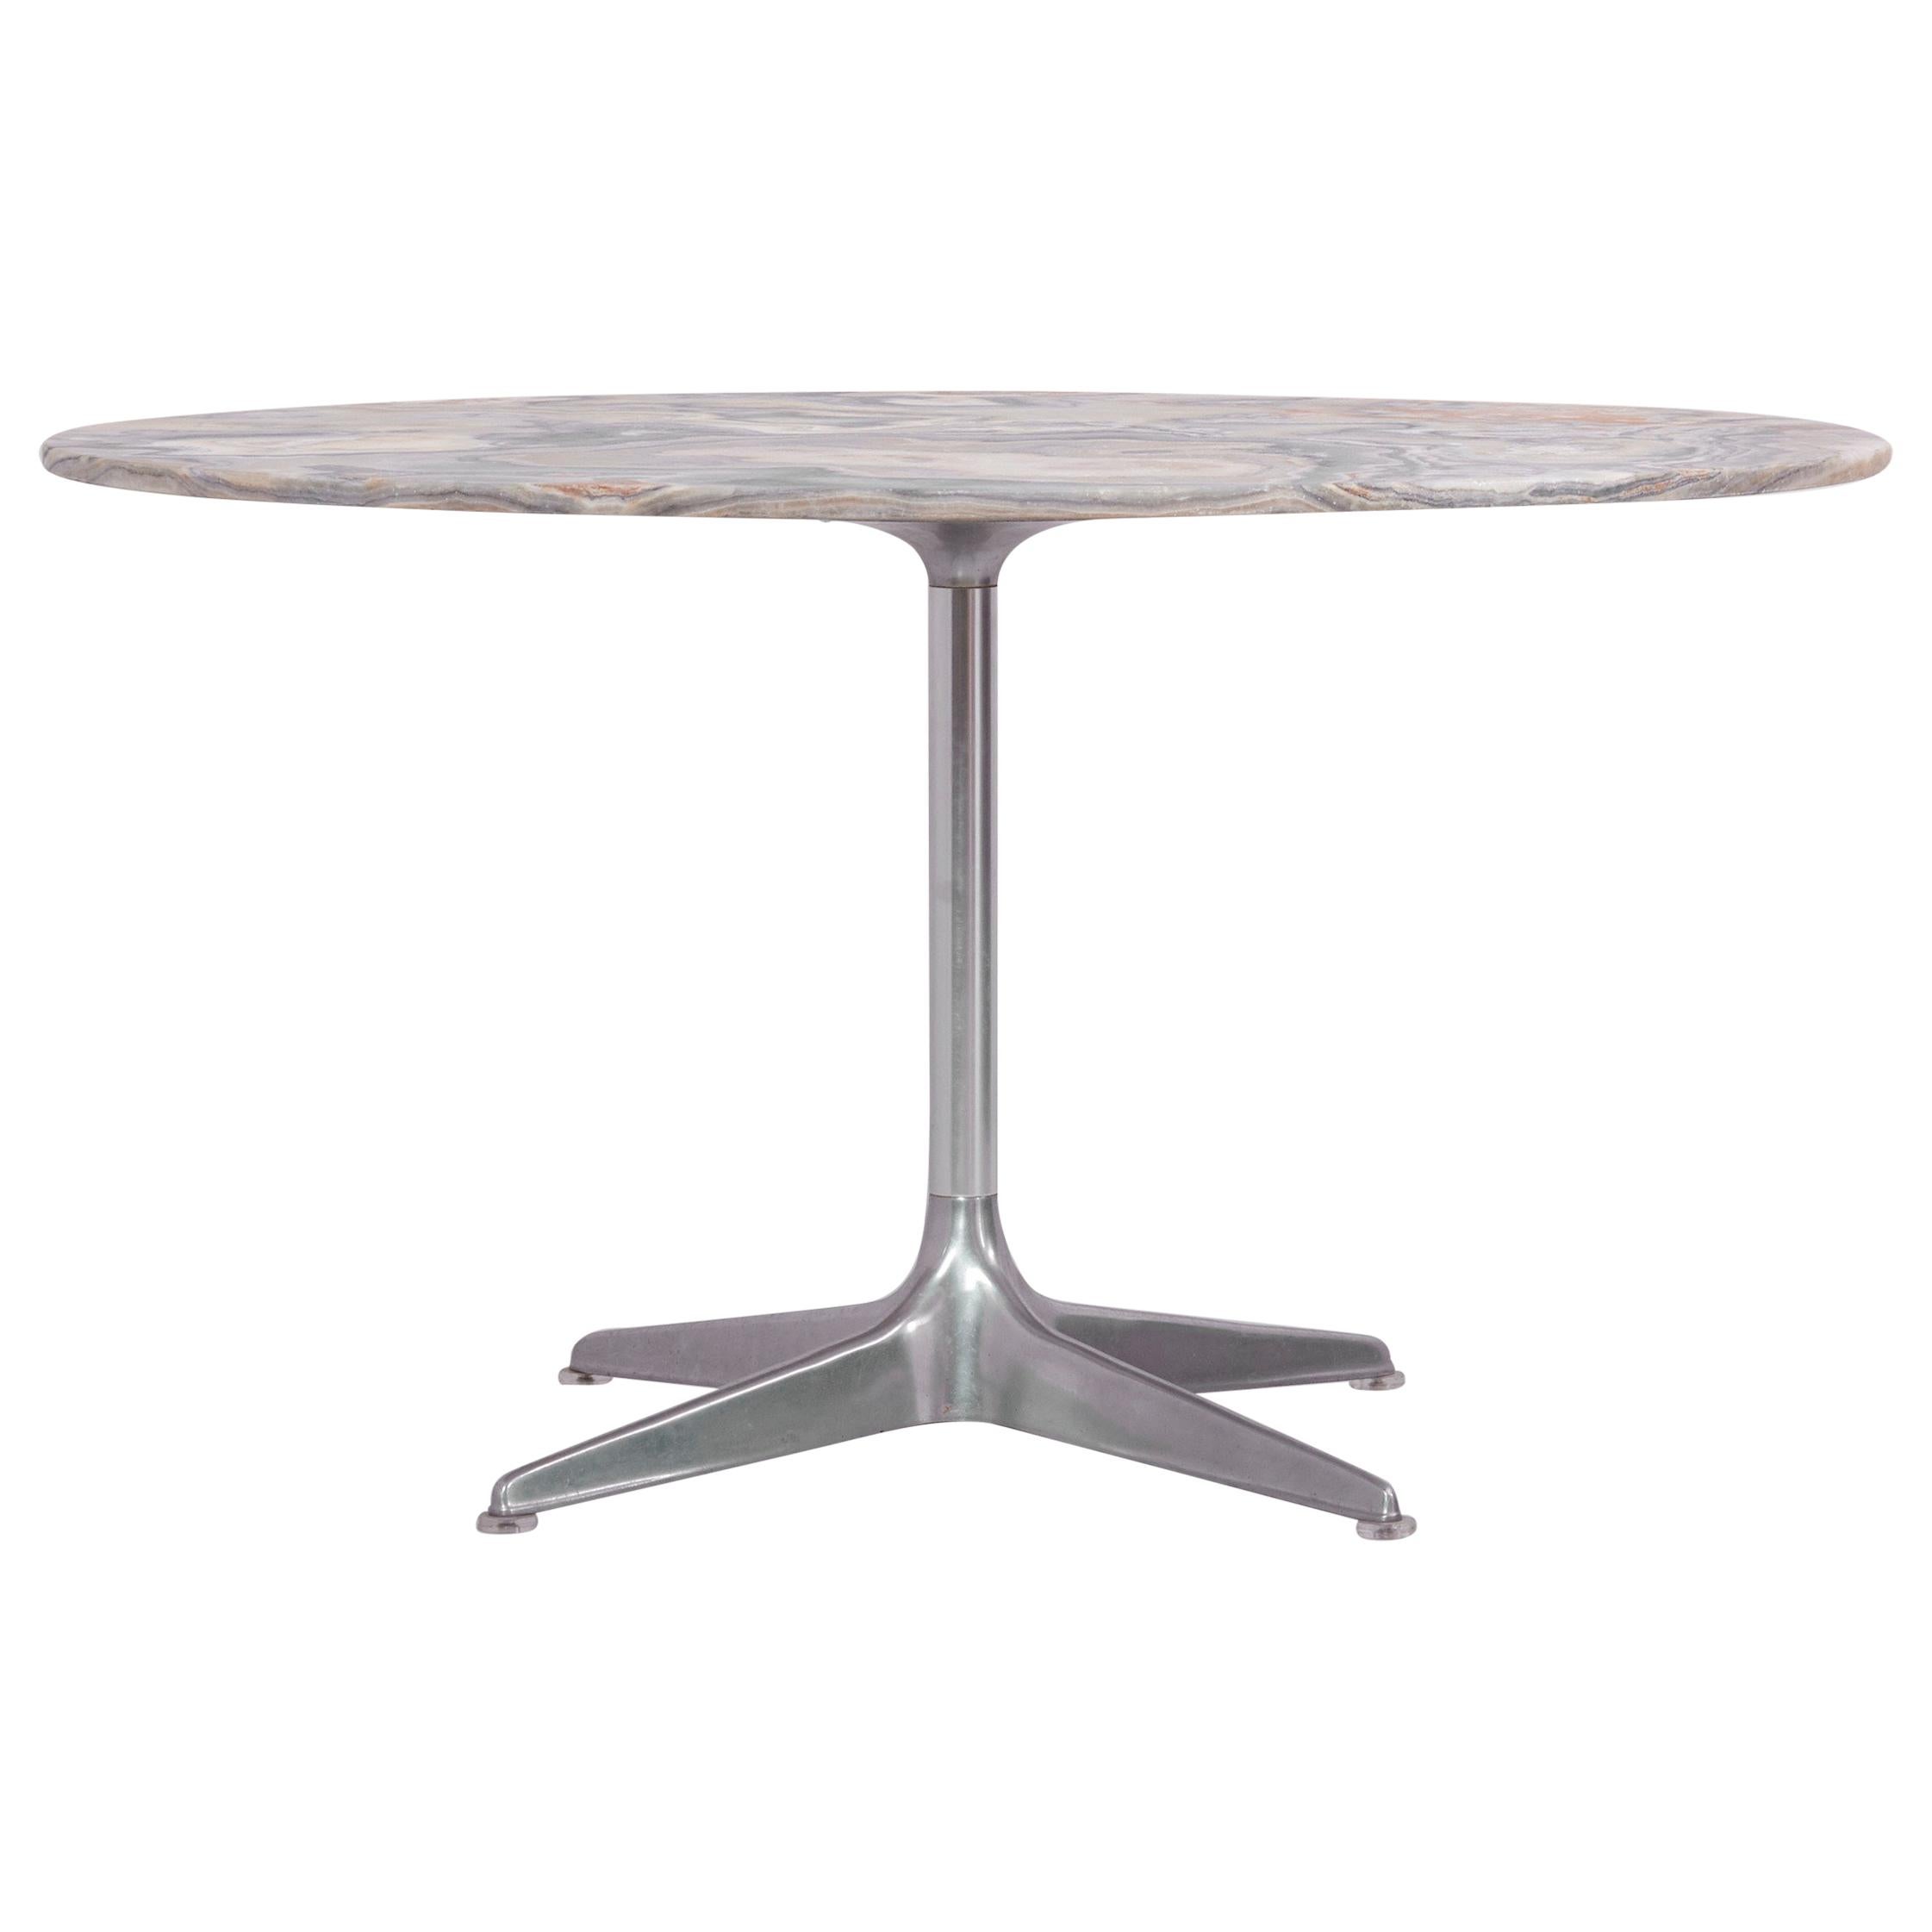 Round Marble Dining Table by Horst Brüning for Cor, Germany - 1970s